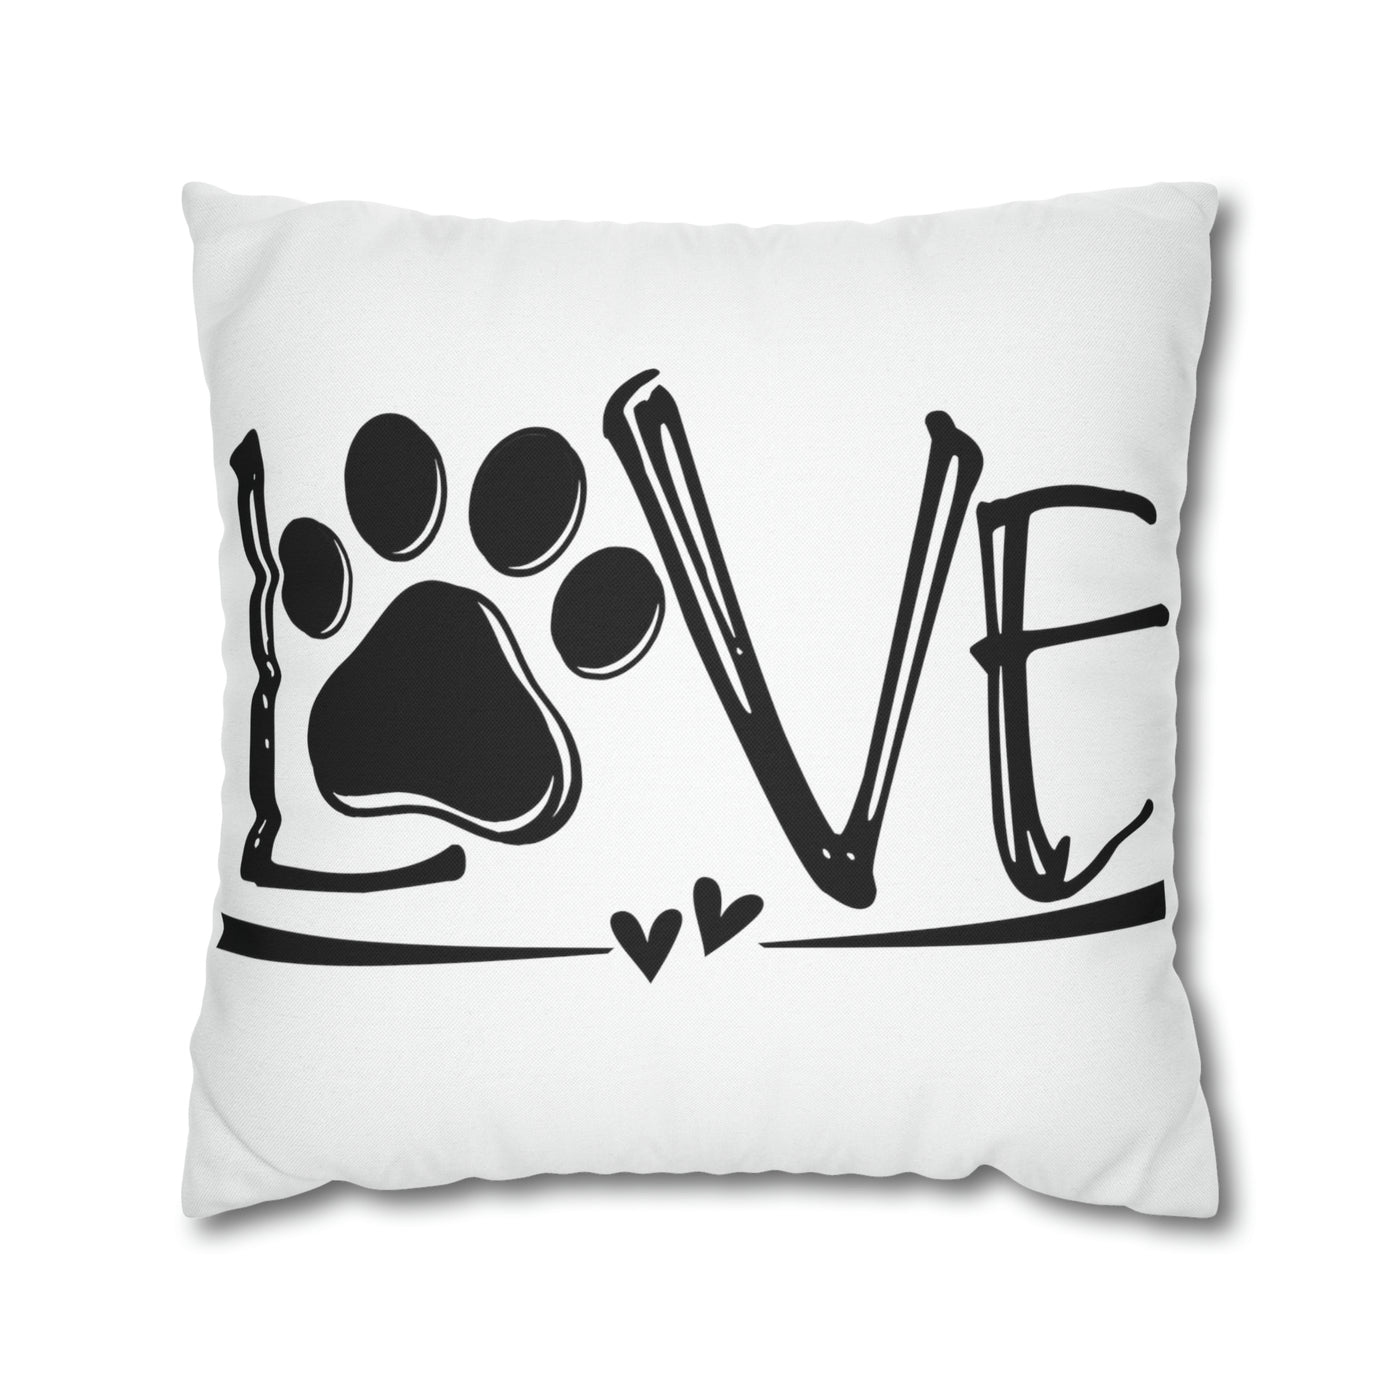 Dog Love Square Pillow Case